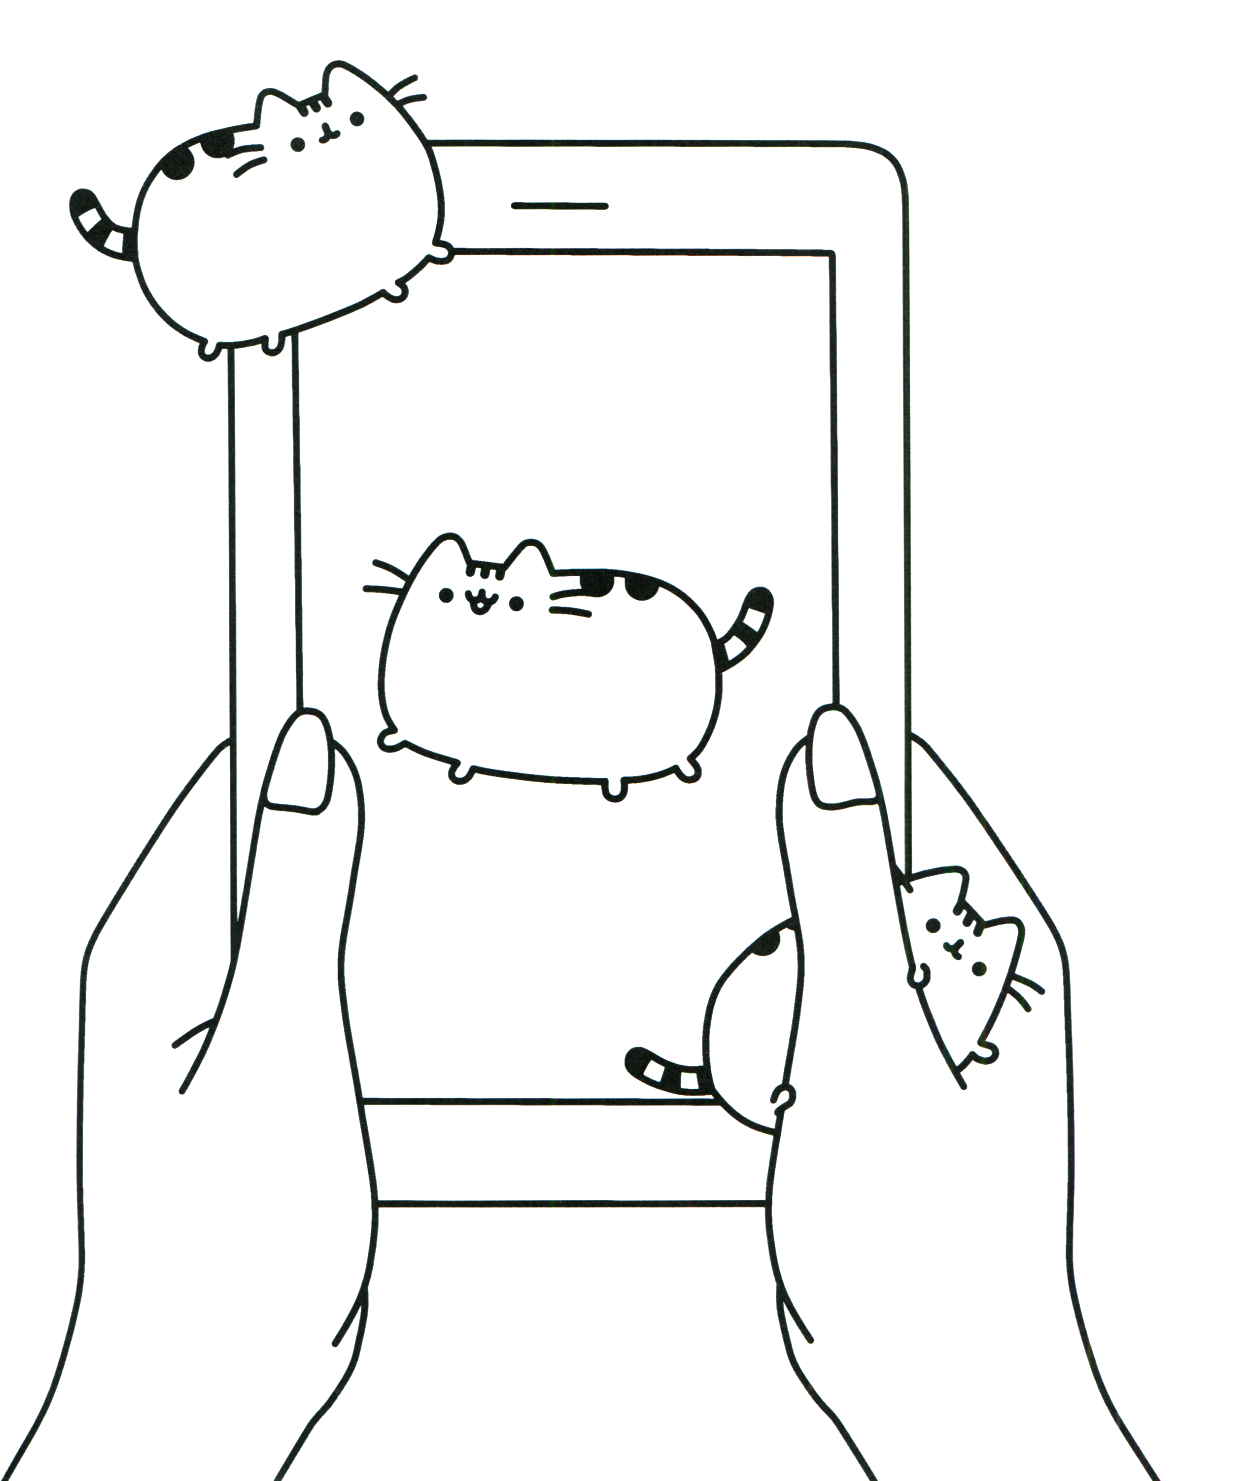 Coloring Rocks Pusheen Coloring Pages Cat Coloring Page Cute Coloring Pages